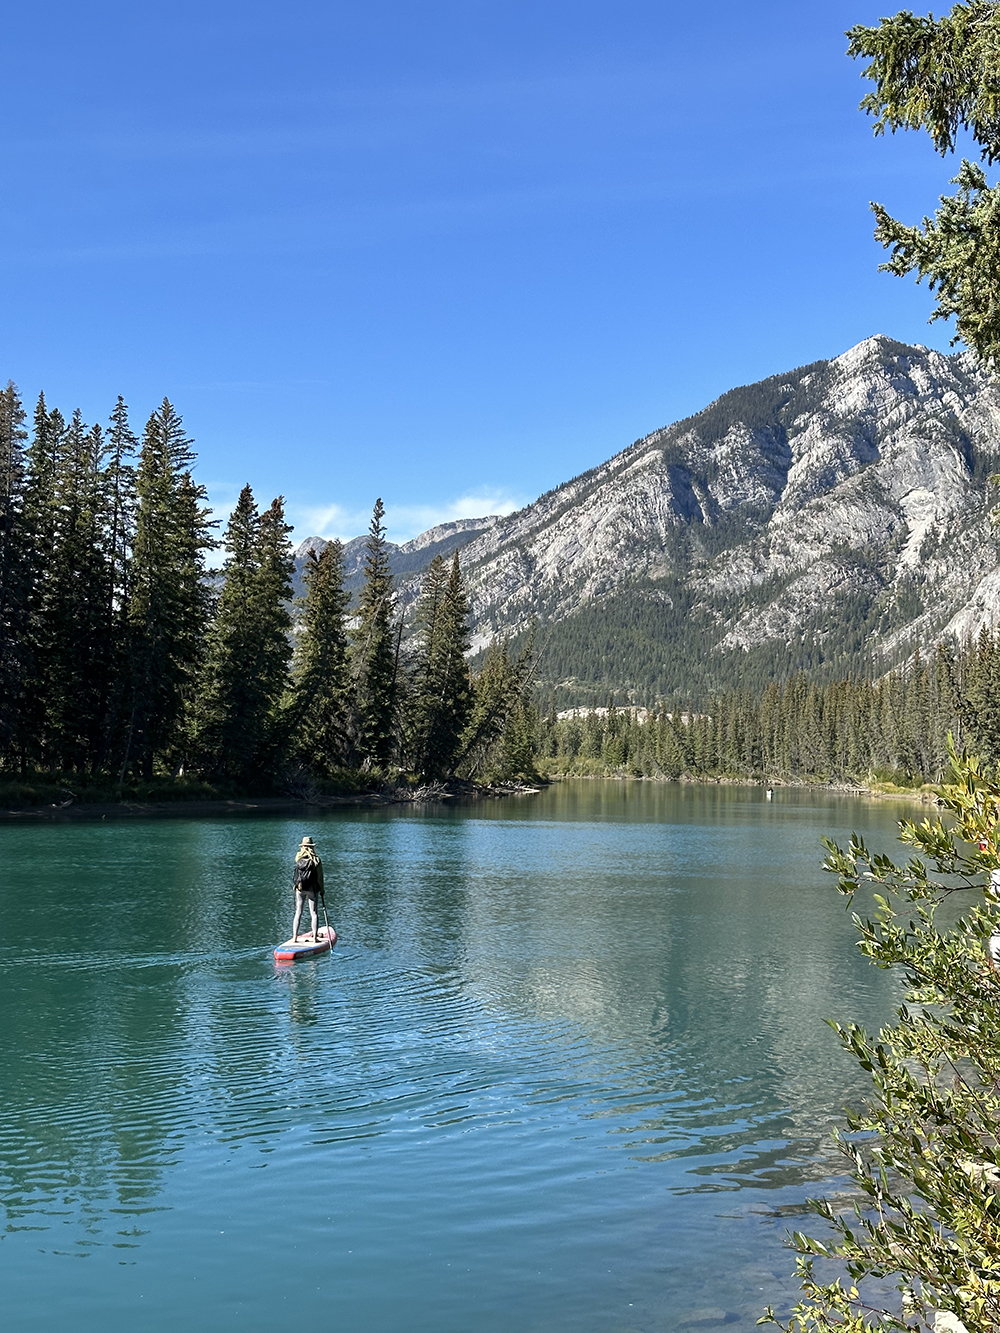 Exploring Banff: Accommodations, Restaurants, and Sightseeing Recommendations